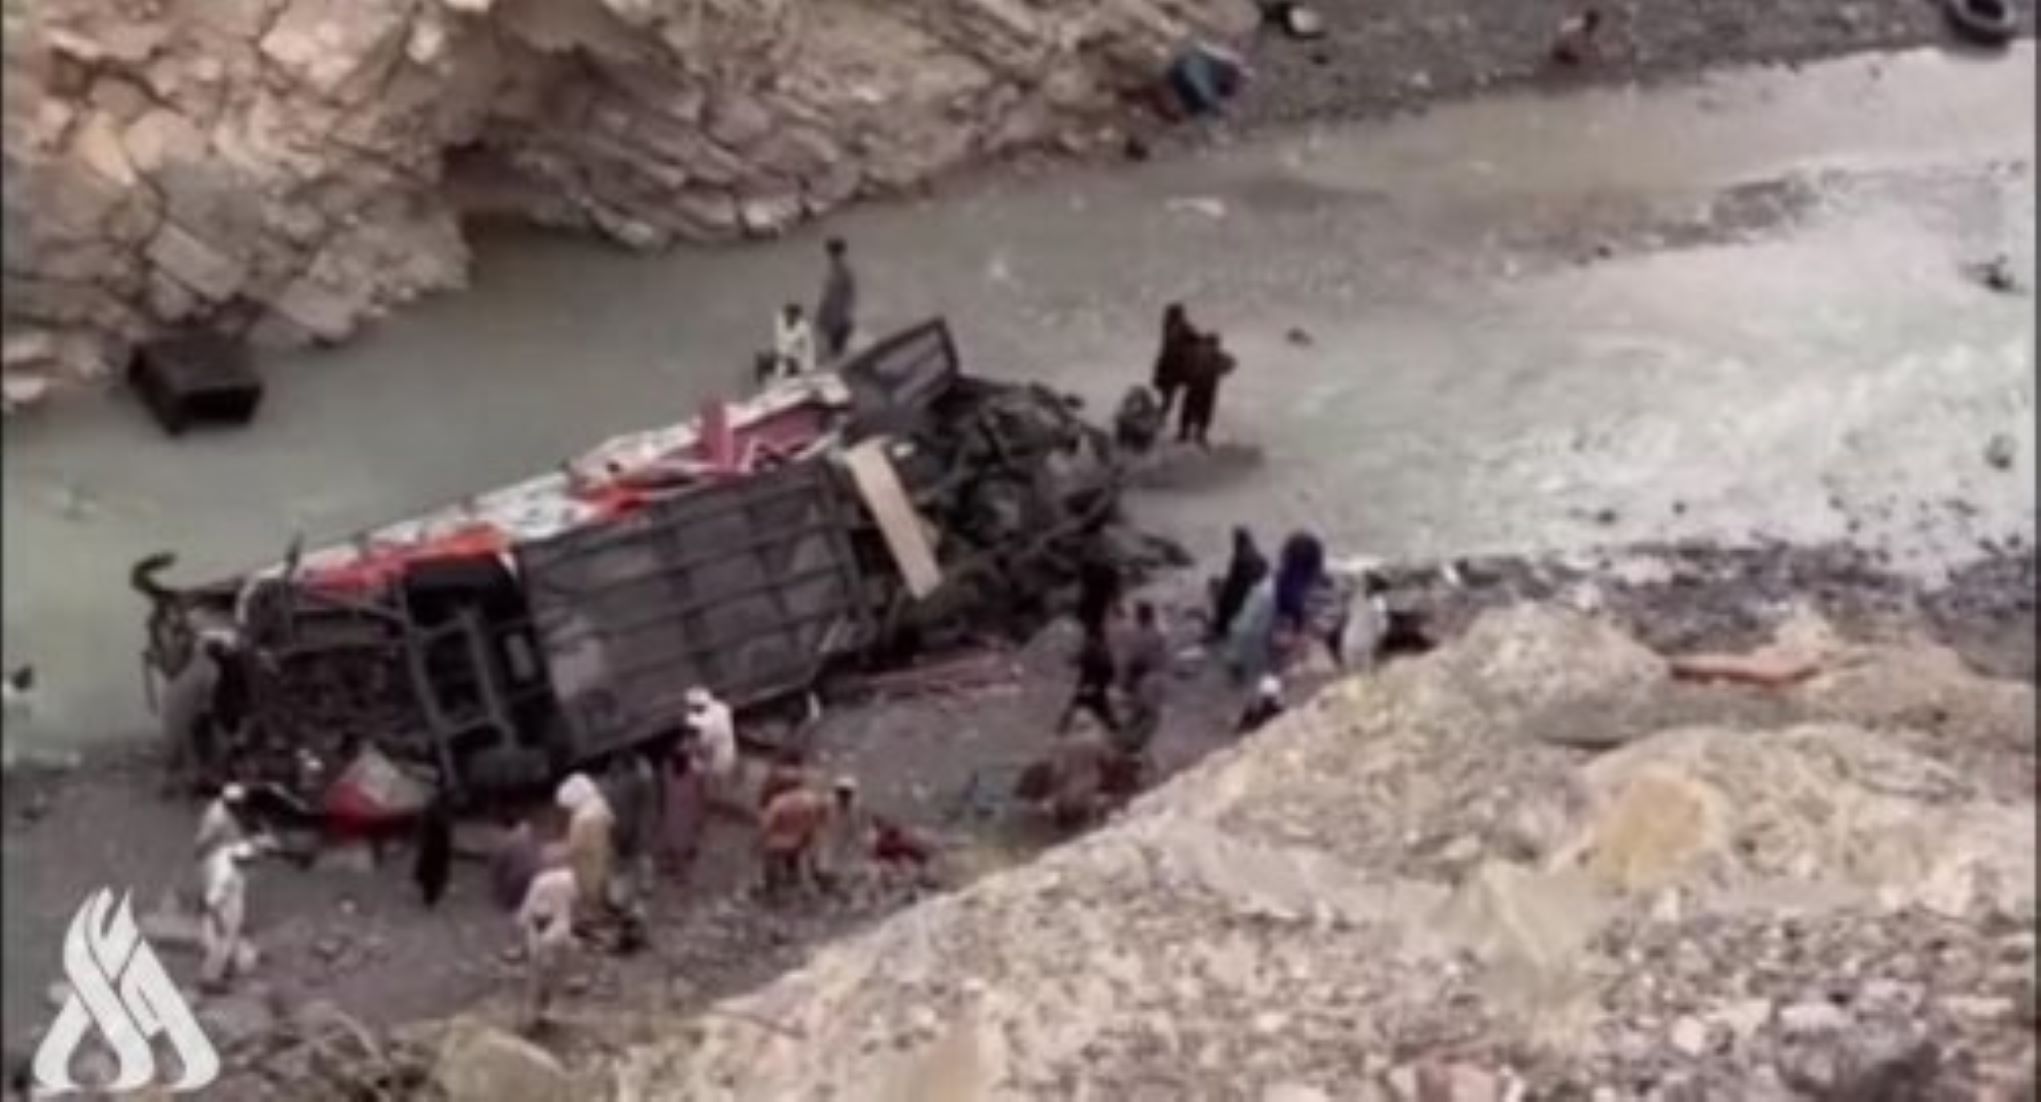 17 Killed, 35 Injured As Truck Crashed In SW Pakistan